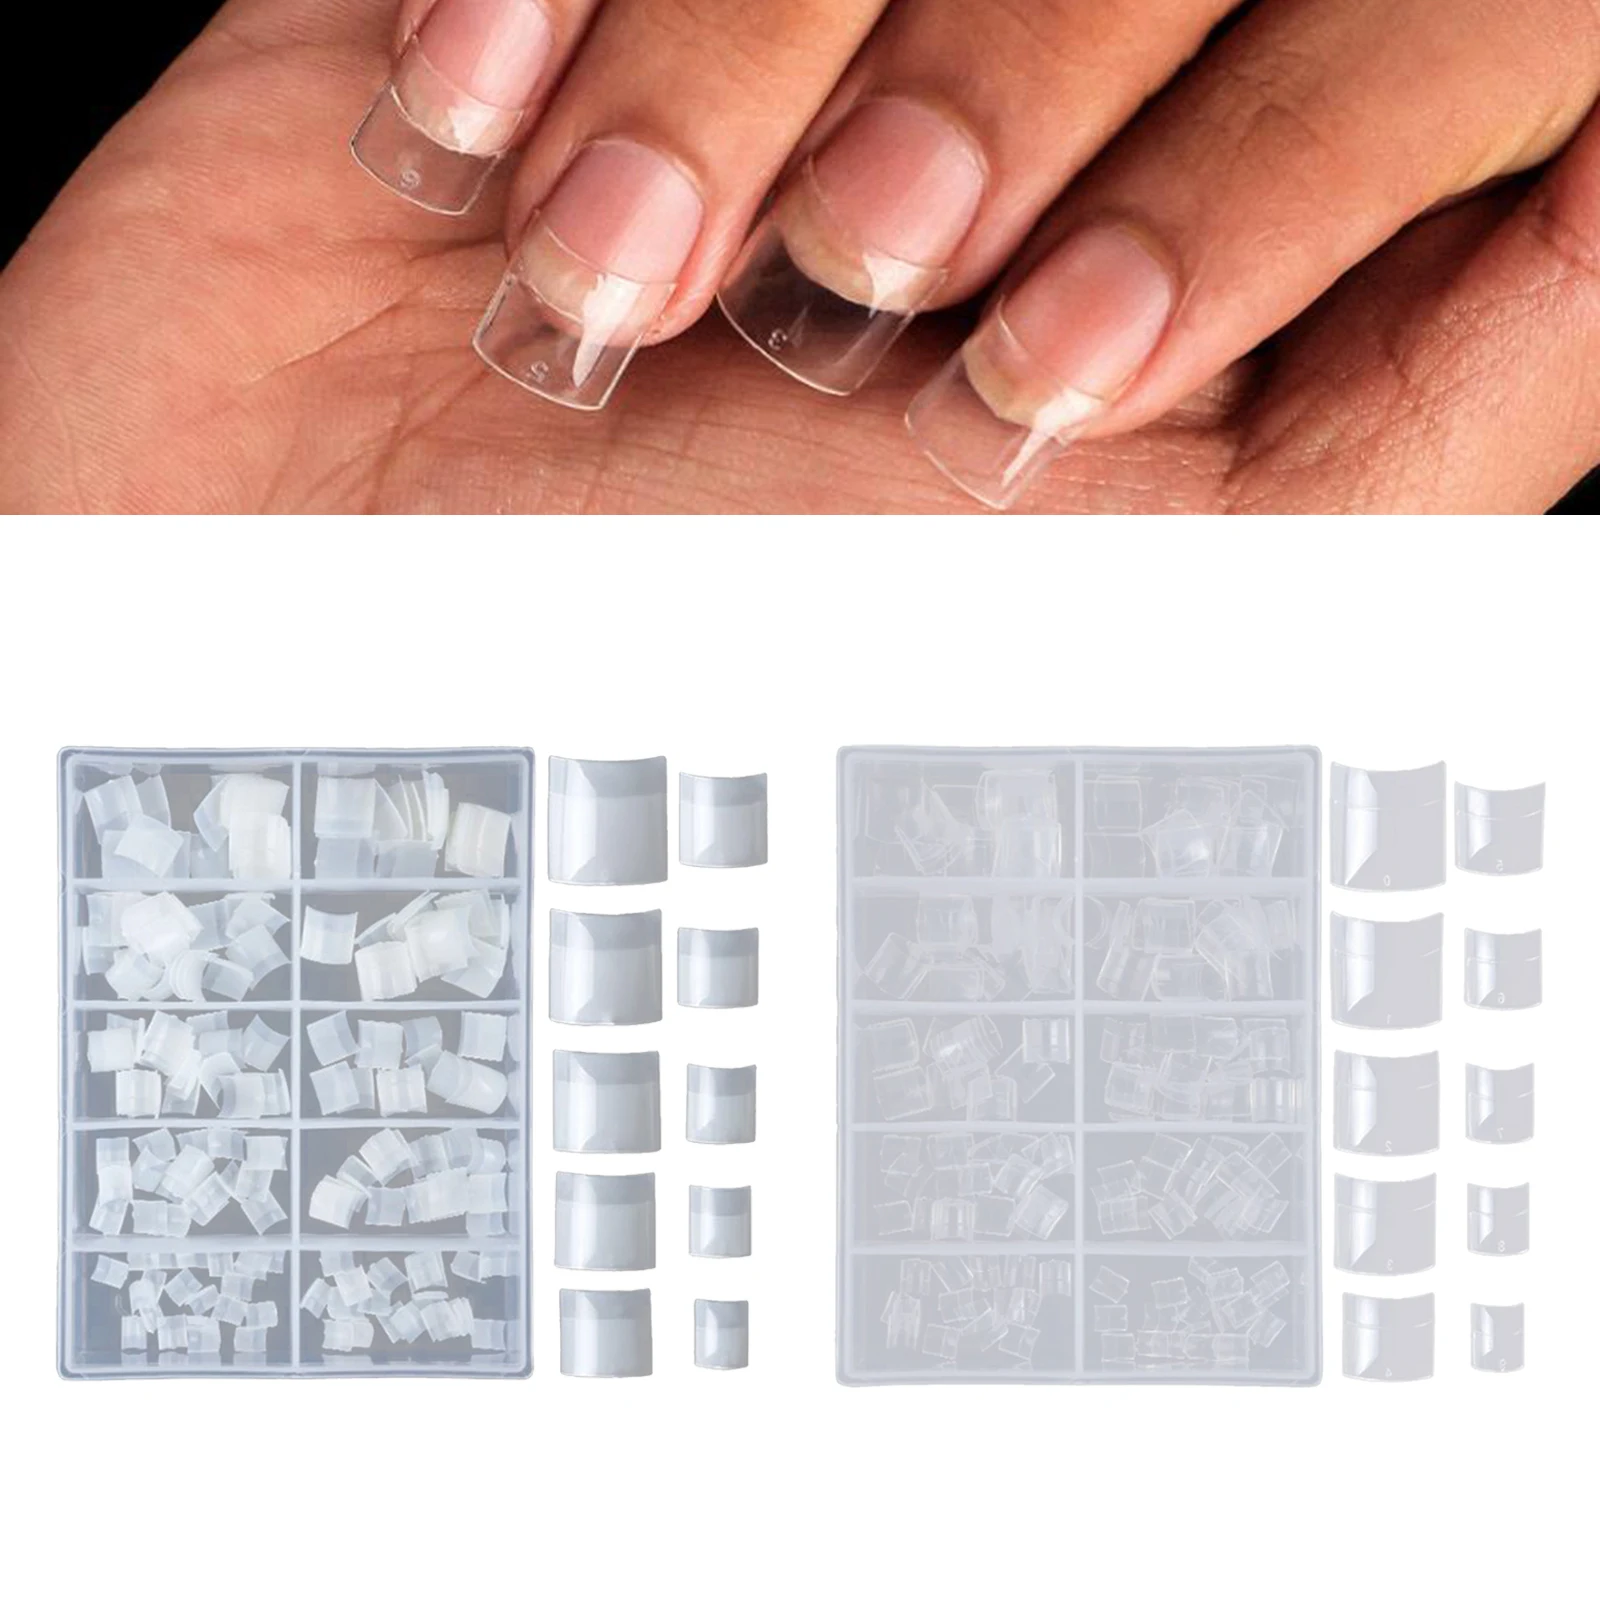 Square Artificial False Nails of 200 Units, Half-tips with Case for Manicure Salons And 